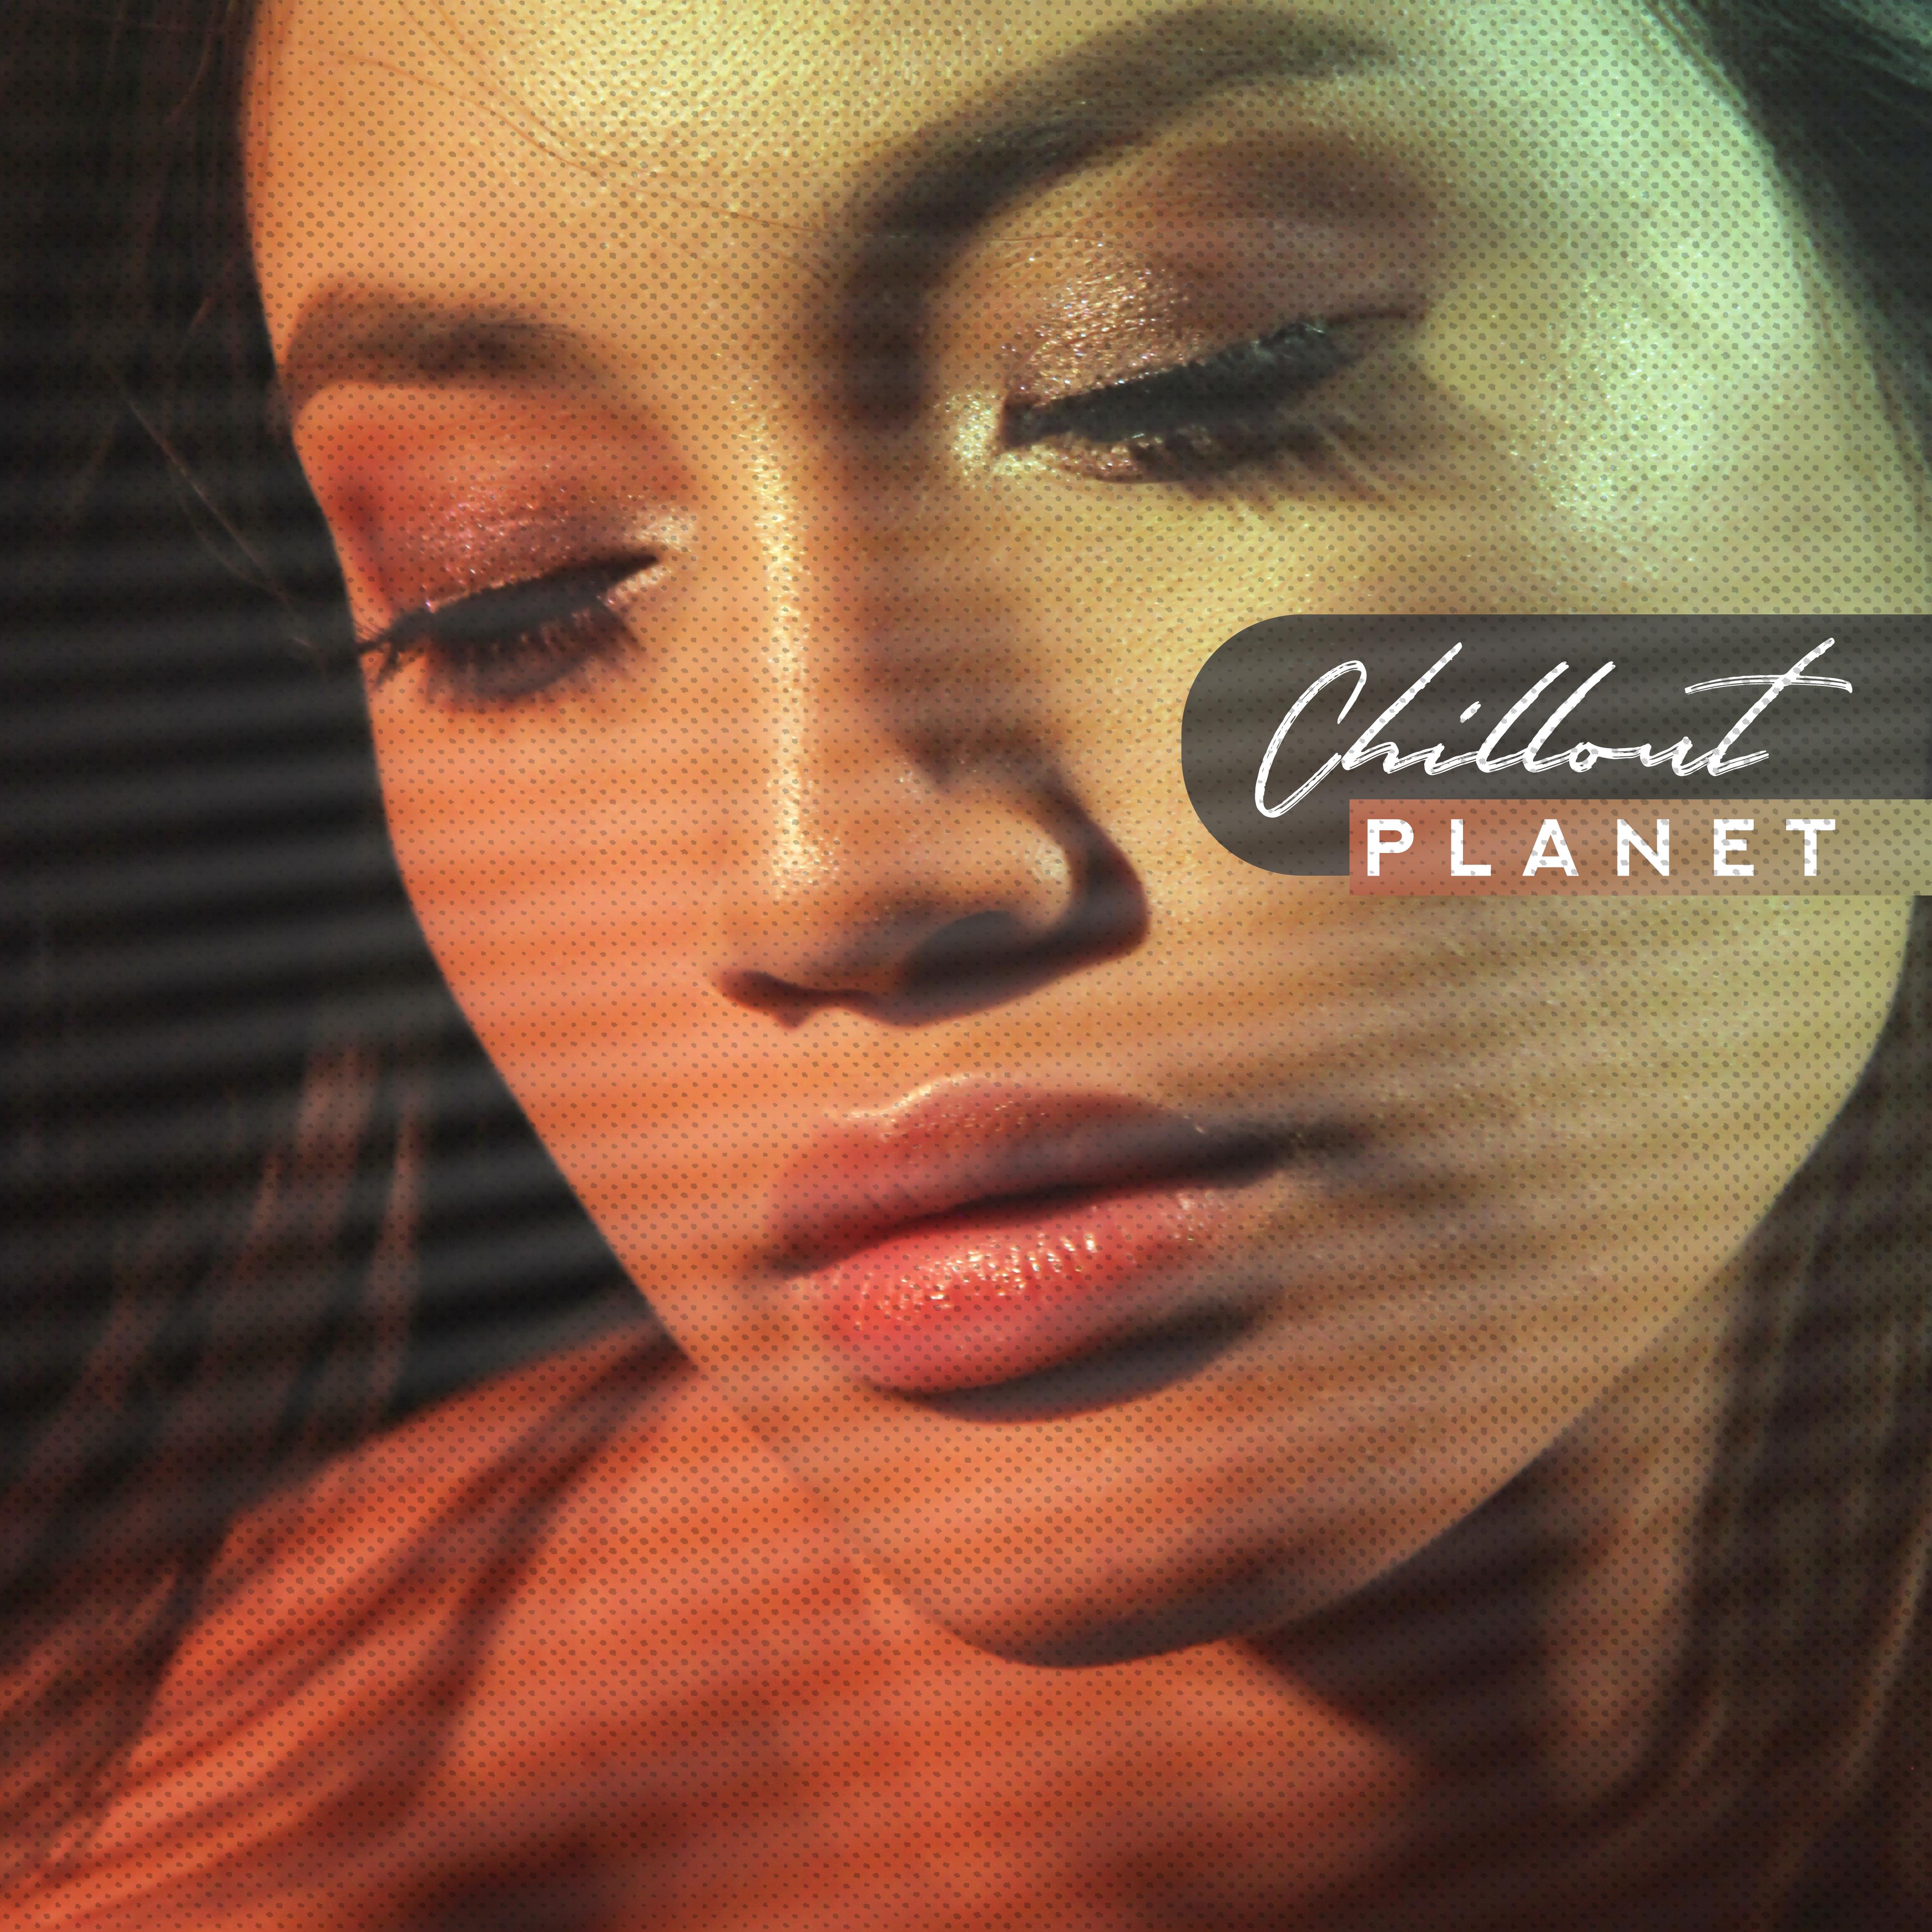 Chillout Planet – Music Inspired by the Culture and Religion of the Whole World: Indians, Buddhism, Orientalism and Hinduism